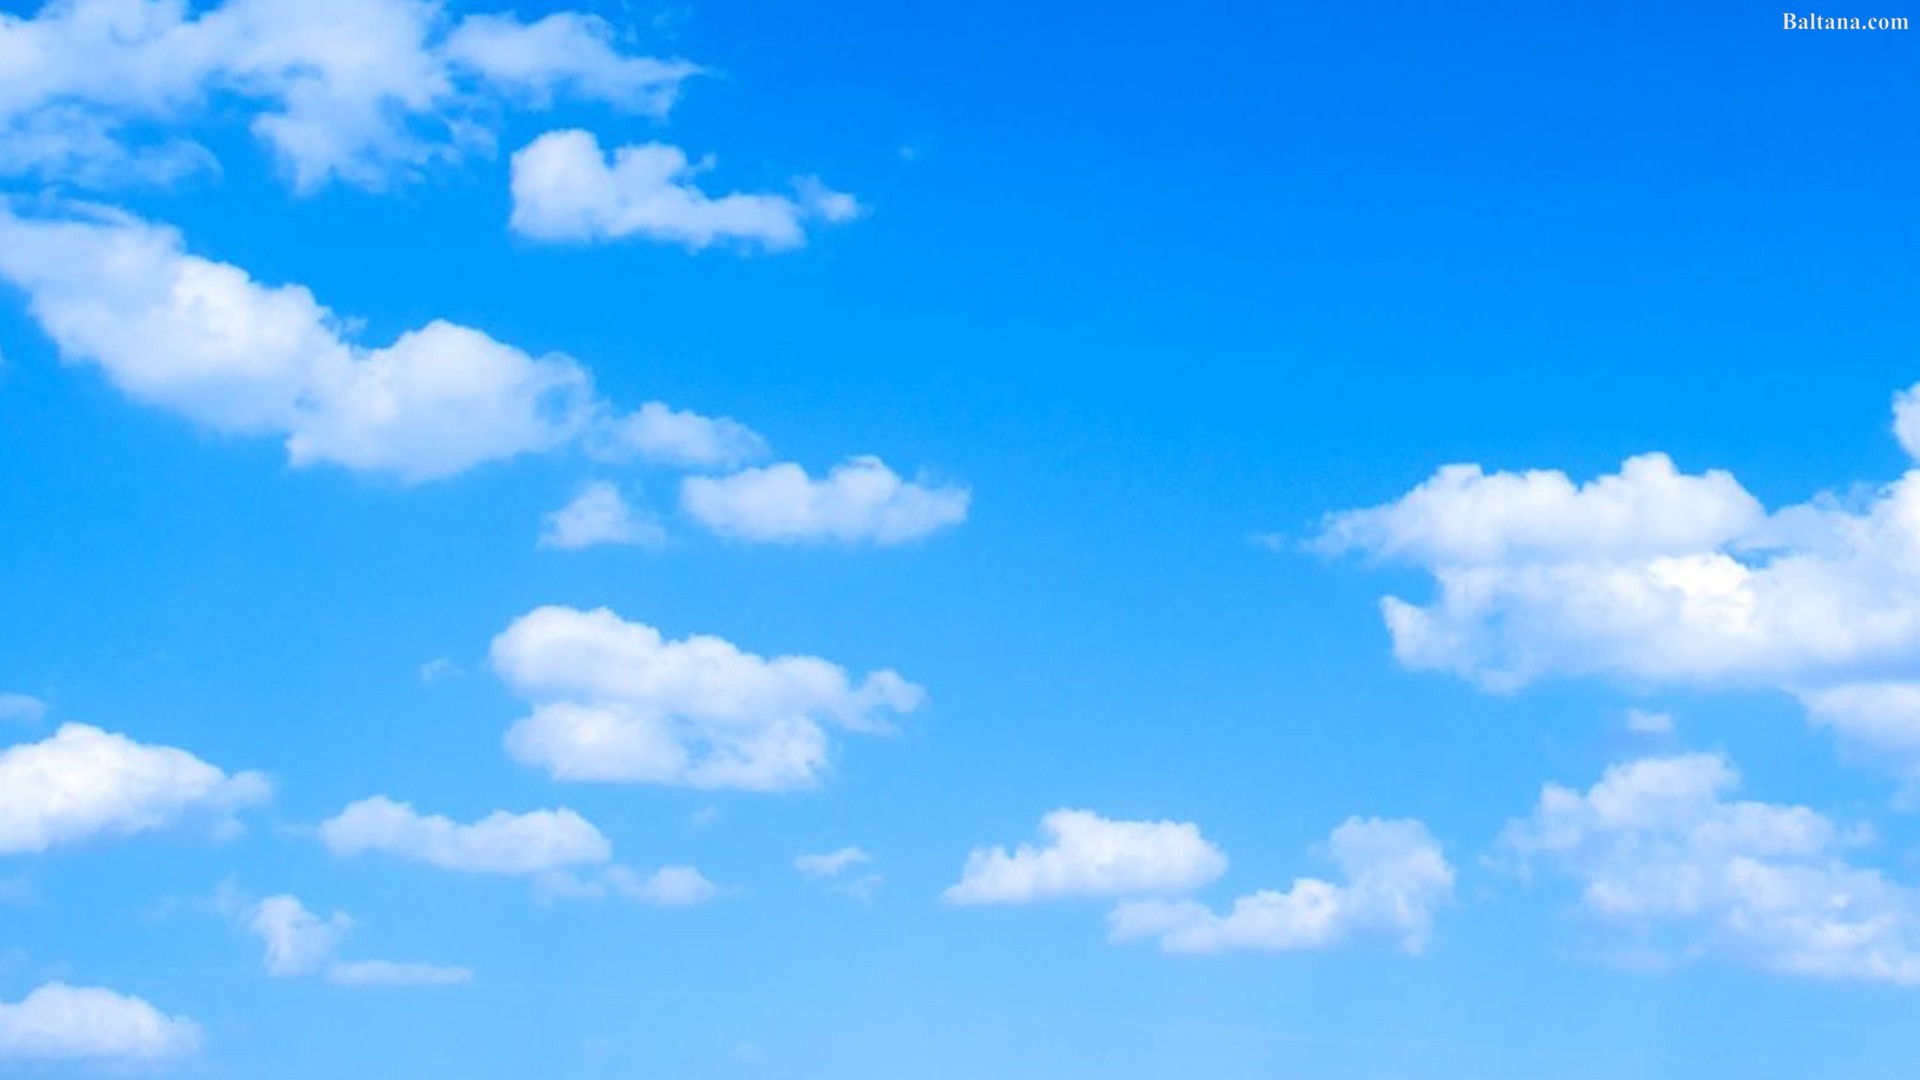 [29+] Blue Sky With Clouds Wallpapers on WallpaperSafari